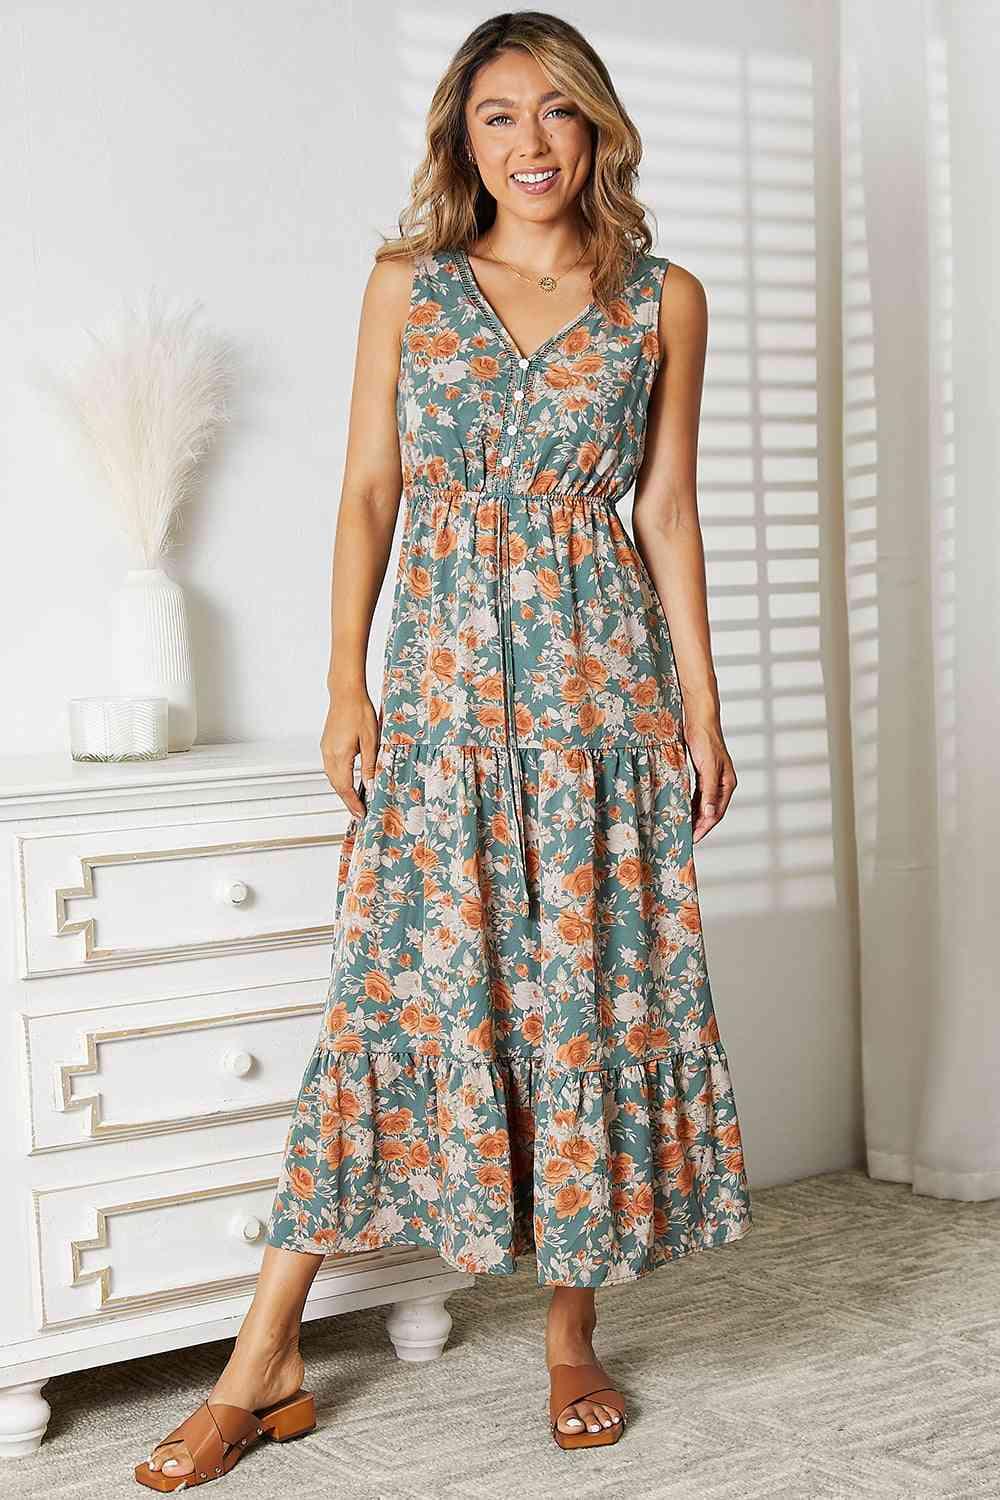 Double Take Floral V-Neck Tiered Sleeveless Dress - God's Girl Gifts And Apparel